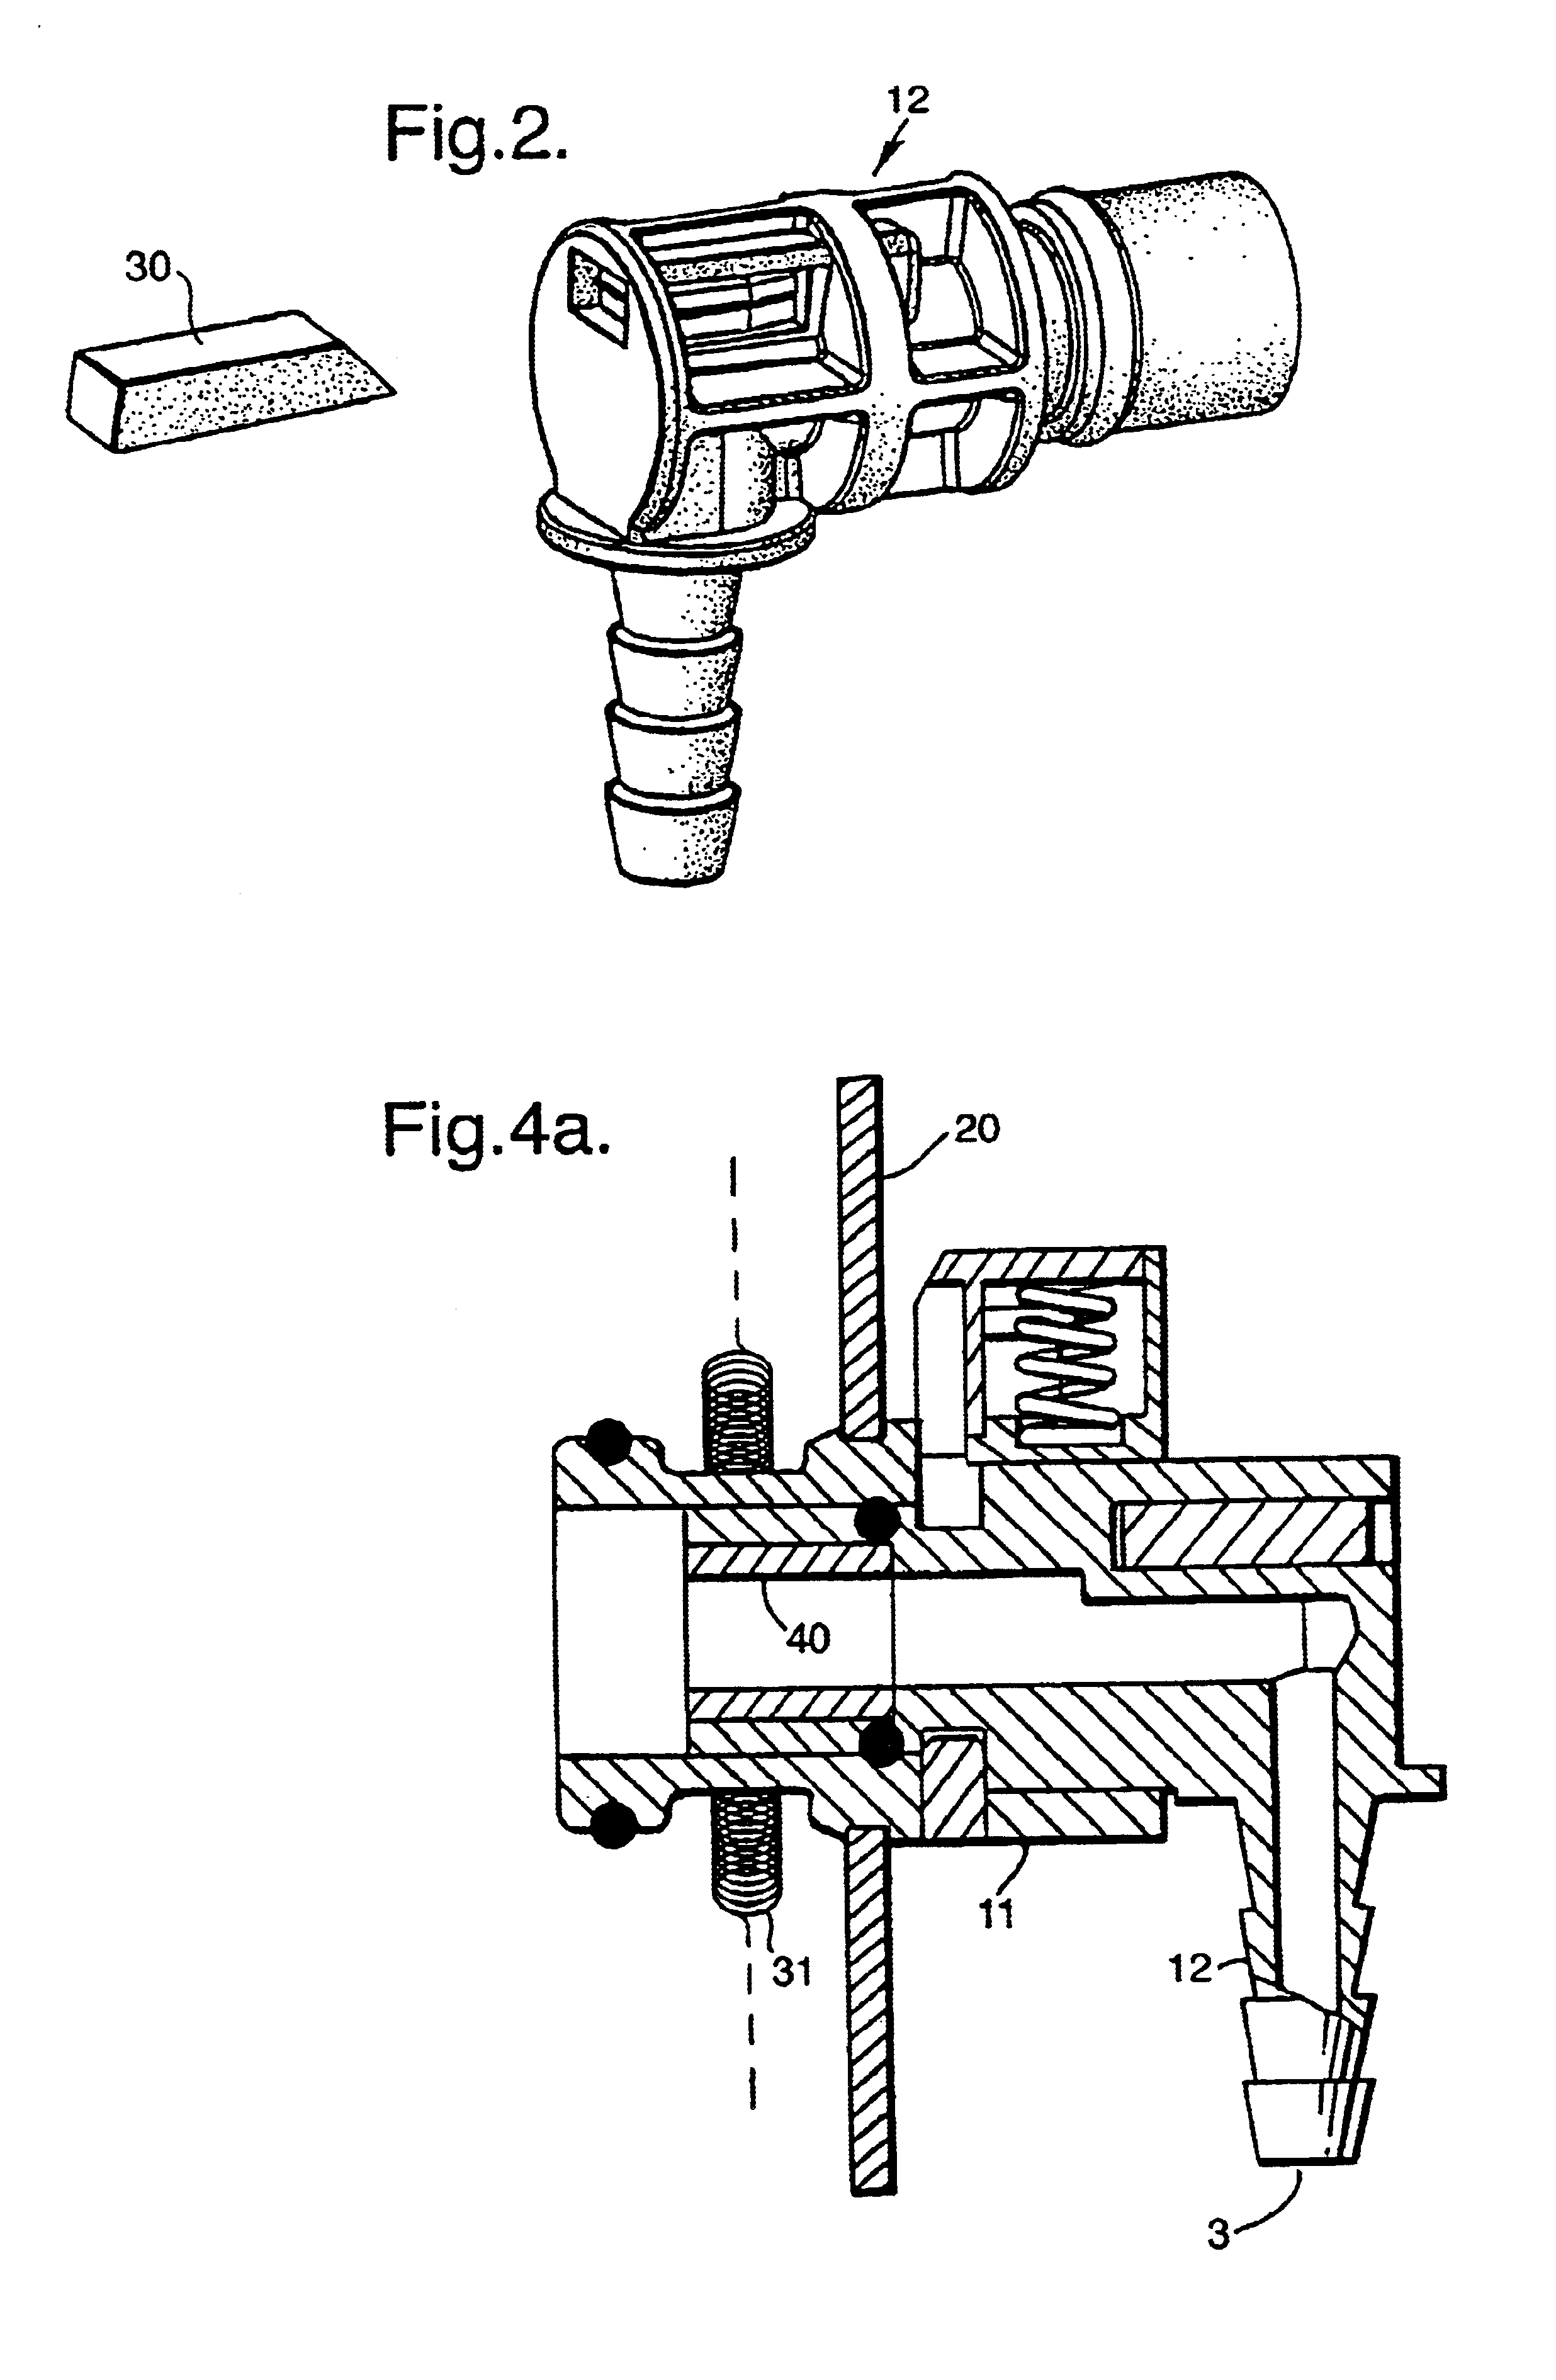 Identification and communication system for inflatable devices